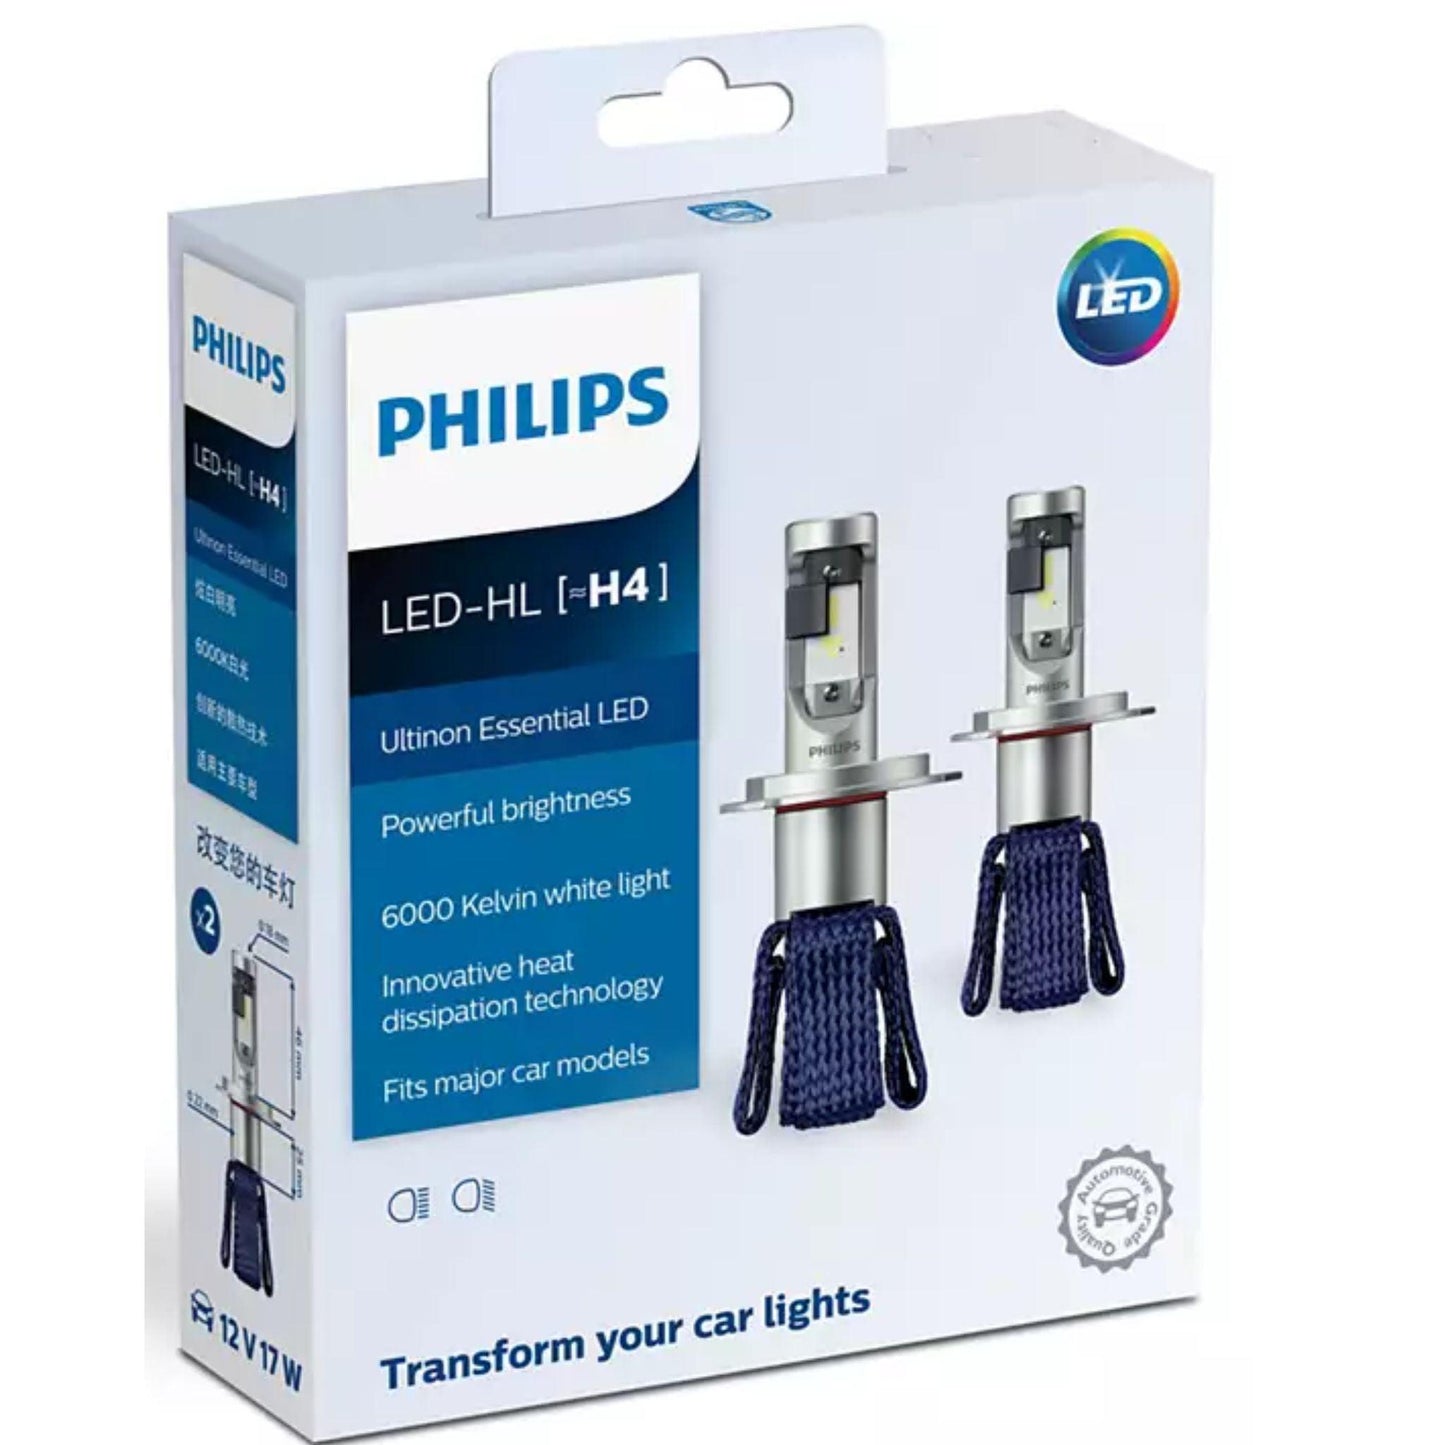 PHILIPS H4 11342UEX2 Ultinon Essential Headlight Car LED (12 V, 17 W)  (Universal For Car, Pack of 2)